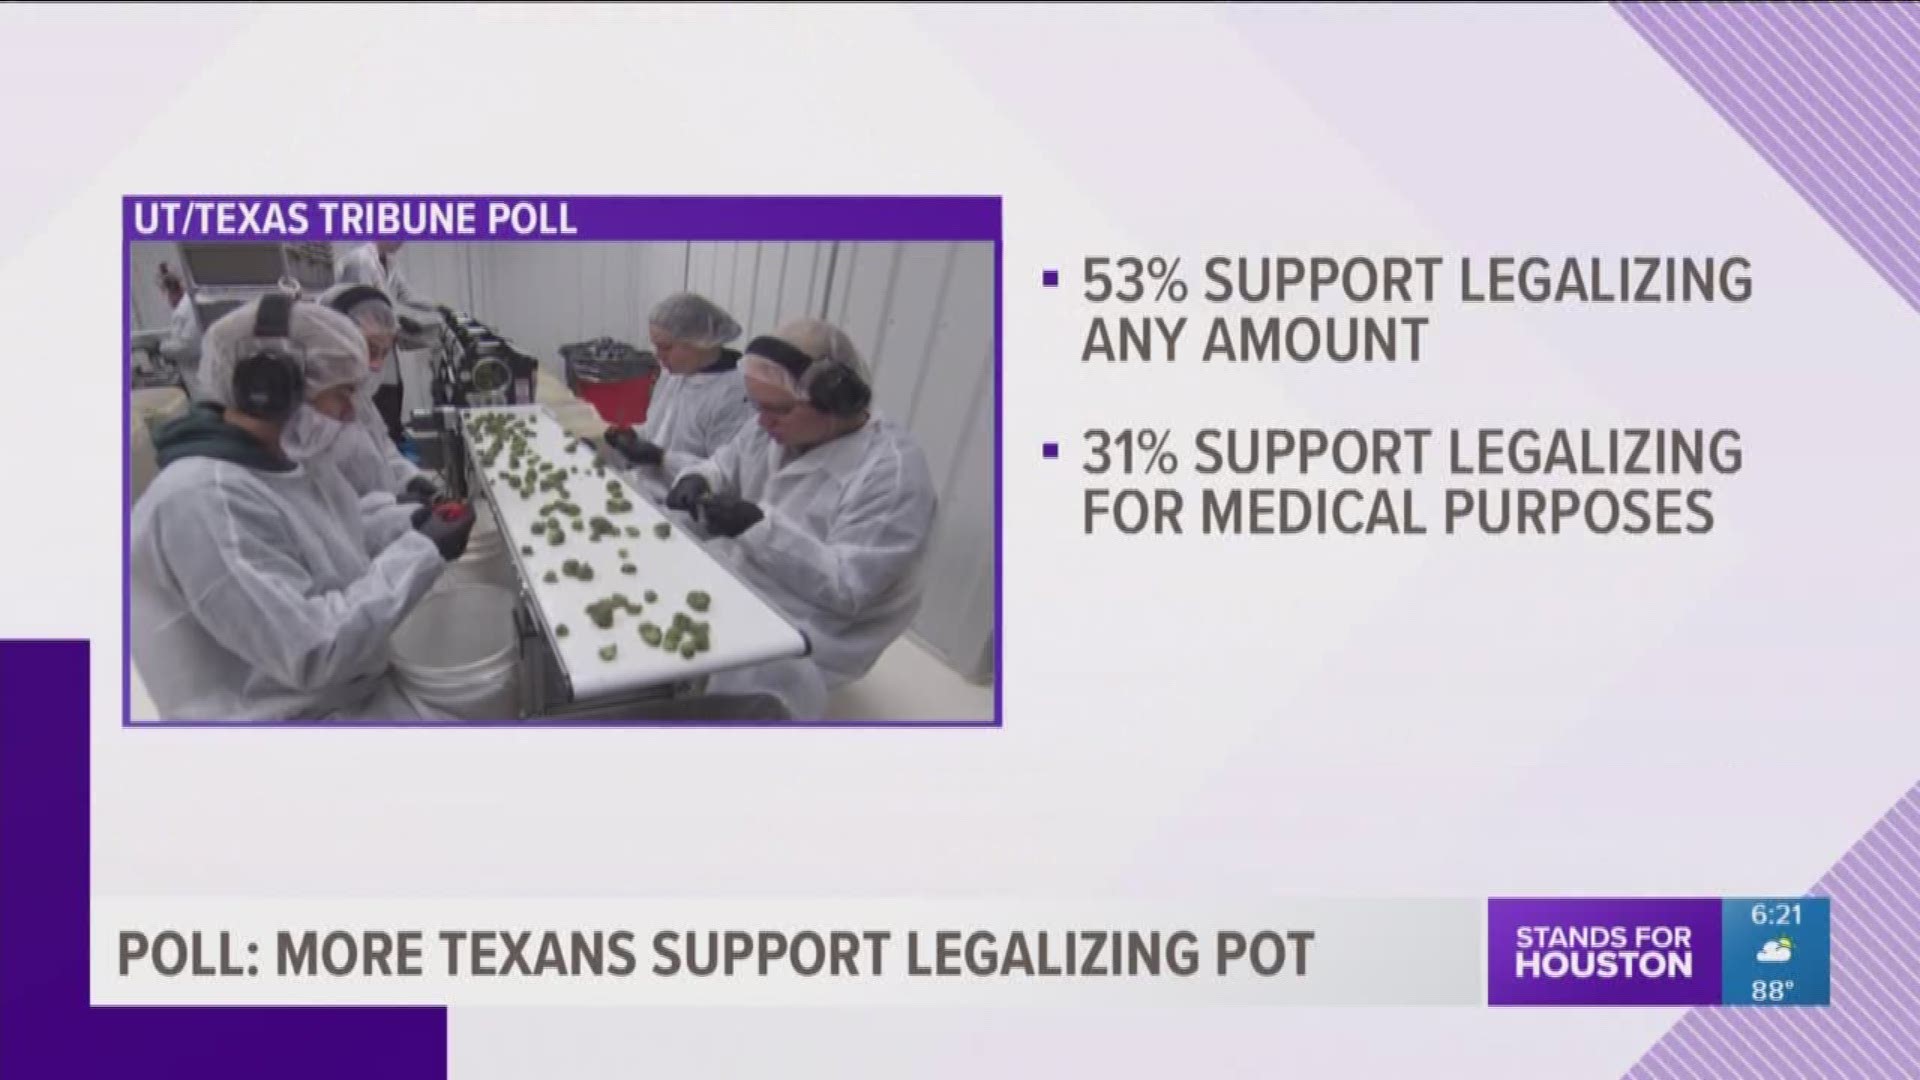 According to a new University of Texas - Texas Tribune poll, more than half of the state's registered voters believe pot should be legalized. 